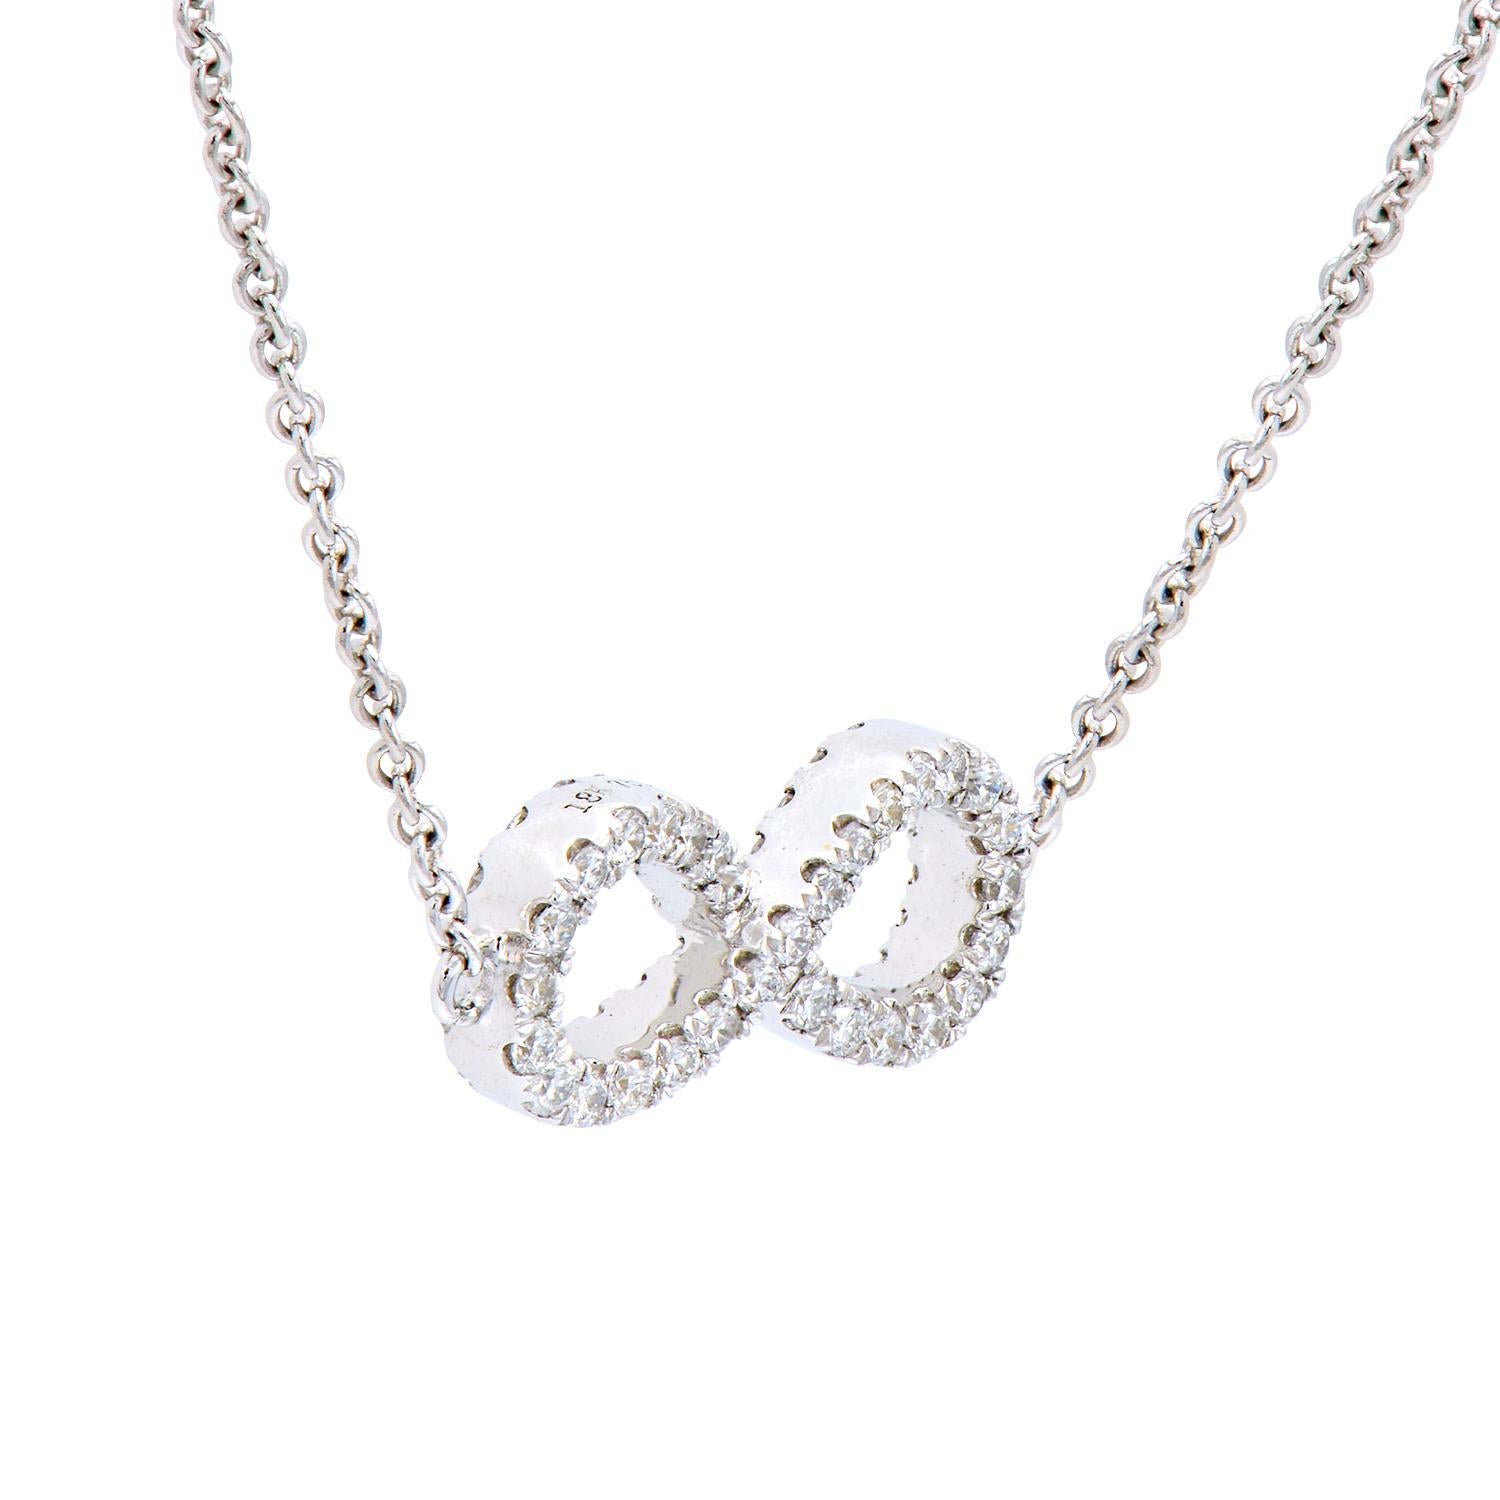 Show that your love and friendship is forever with this diamond infinity necklace. This 3.0 grams of white gold necklace contains 62 round VS2, G color diamonds which total 0.40 carats of beautiful sparkling diamonds. It comes with an 18